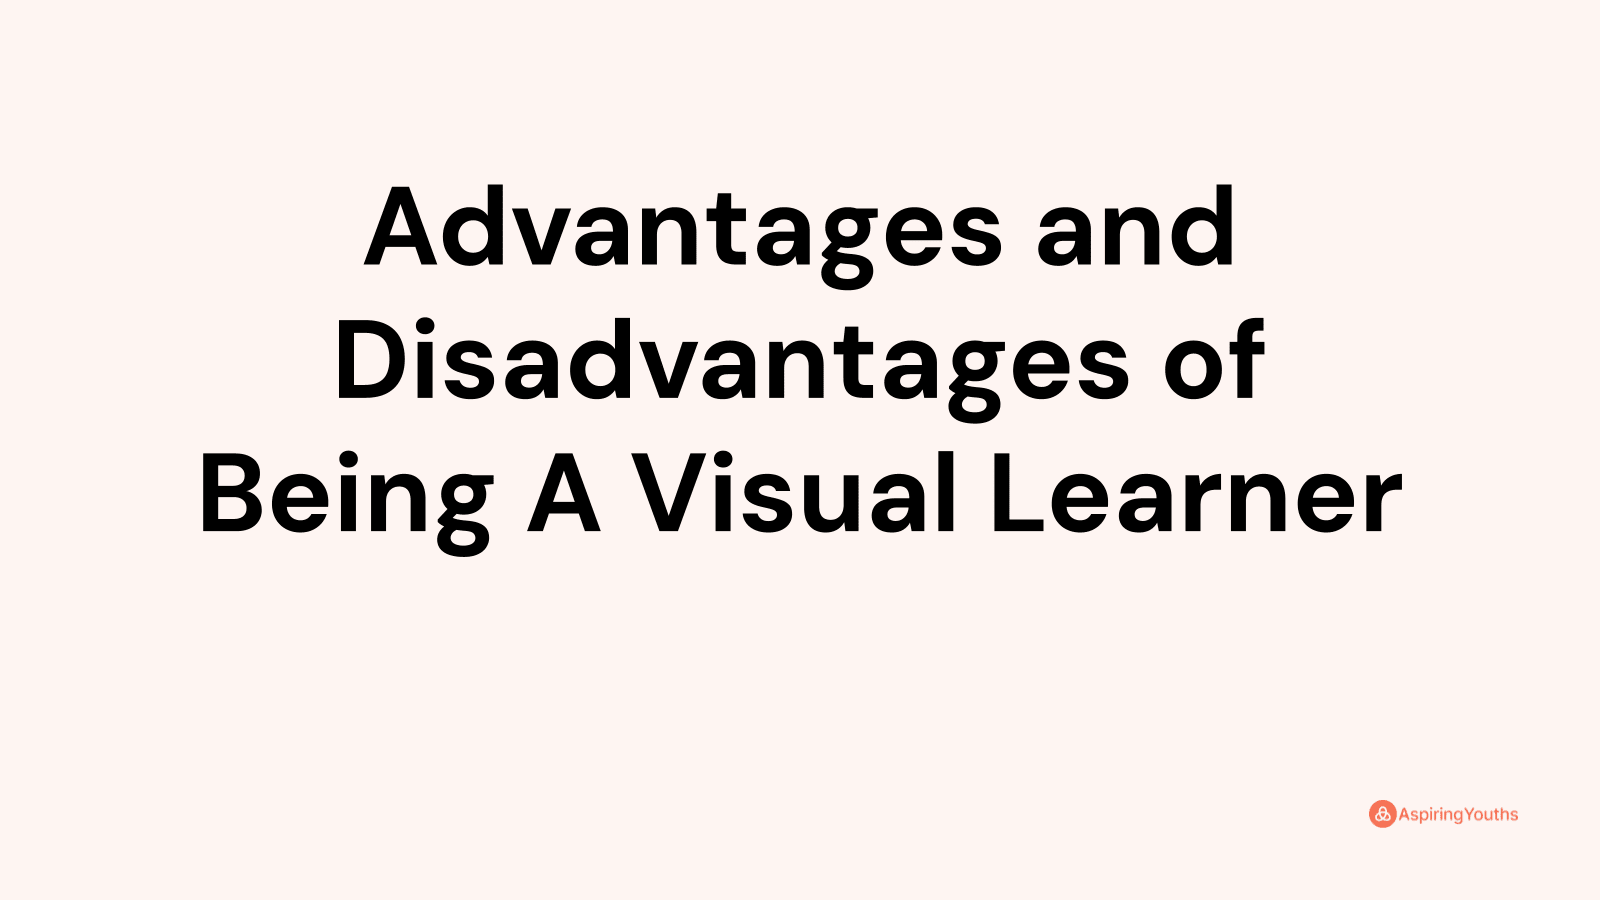 Advantages and disadvantages of Being A Visual Learner